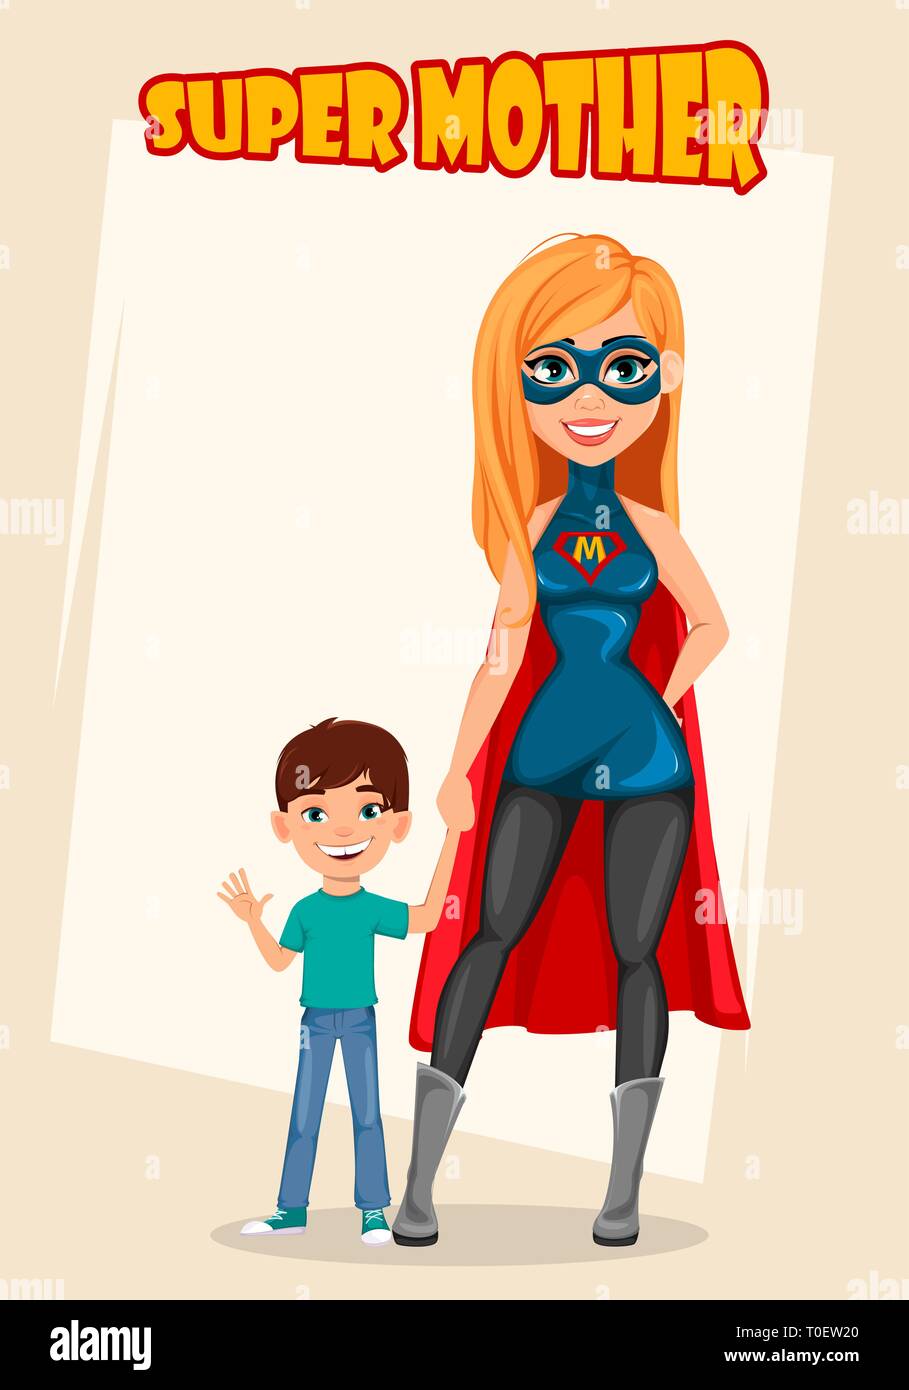 Super mother woman superhero. Concept of woman wearing superhero costume. Cartoon character standing with her son. Vector illustration Stock Vector